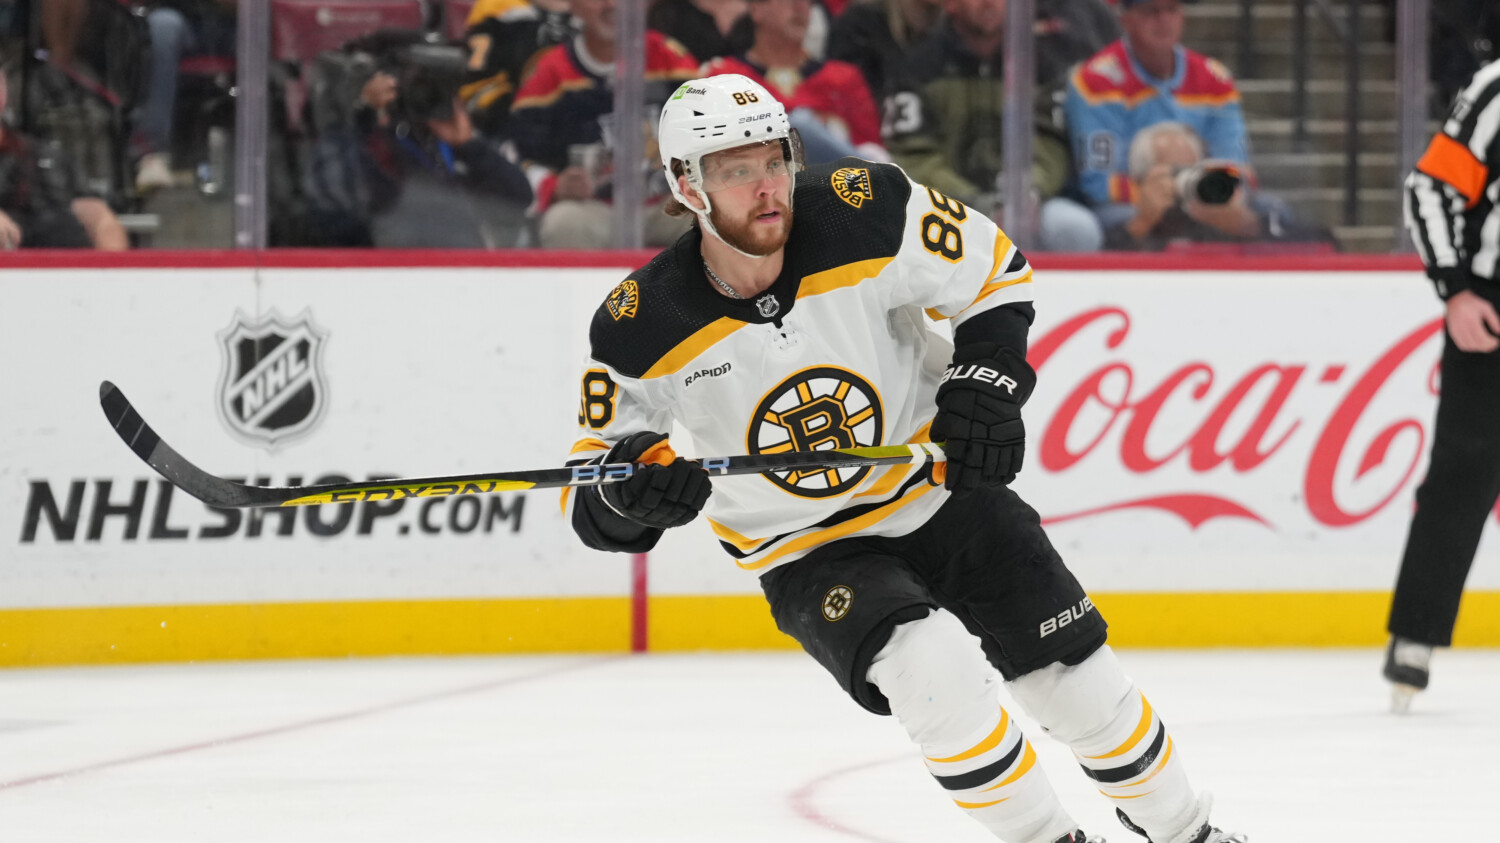 What do they earn? Boston Bruins player salaries